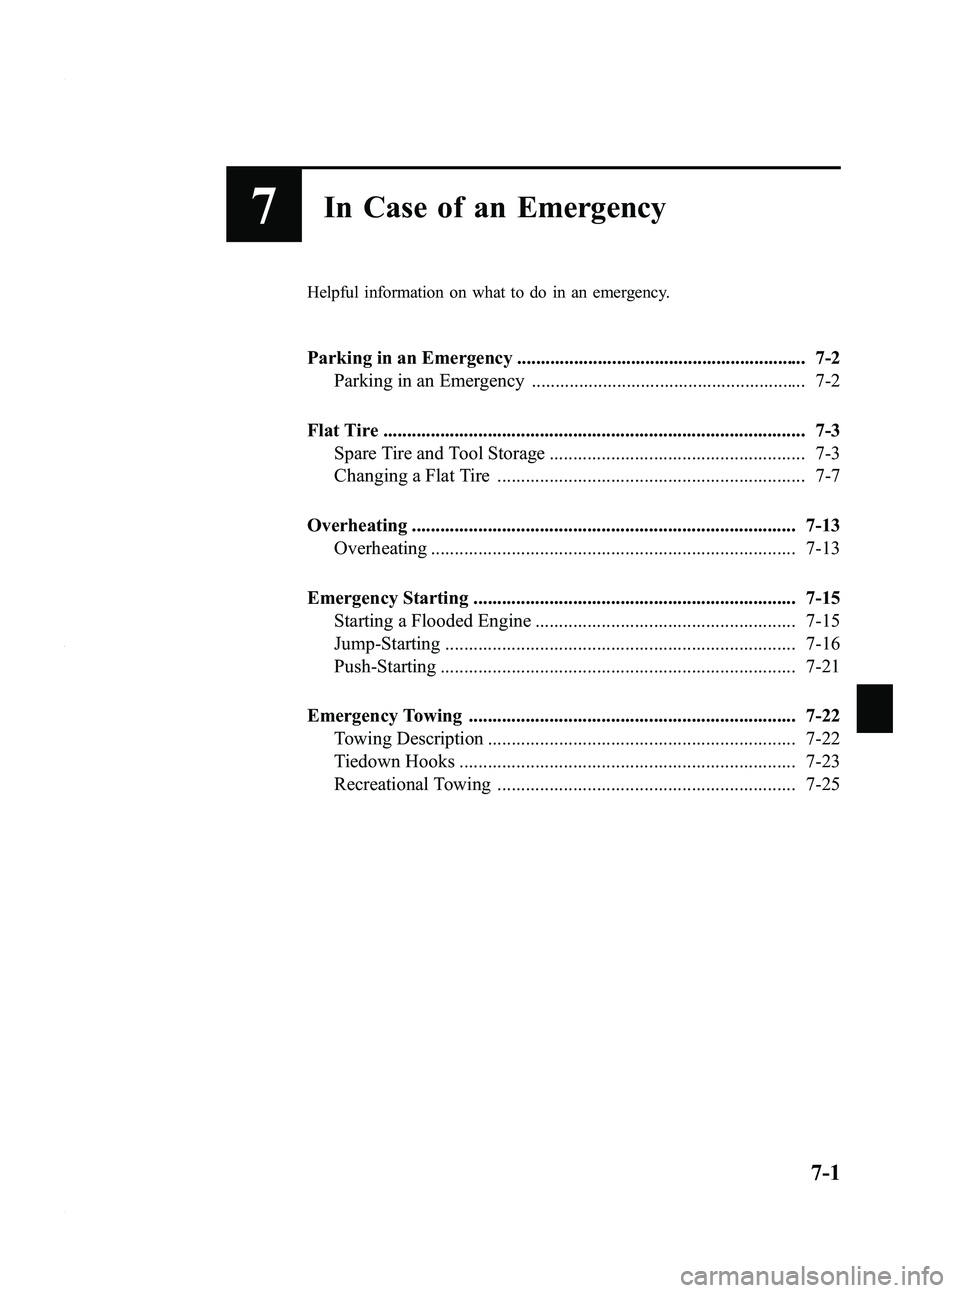 MAZDA MODEL 5 2010  Owners Manual Black plate (247,1)
7In Case of an Emergency
Helpful information on what to do in an emergency.
Parking in an Emergency ............................................................. 7-2Parking in an E